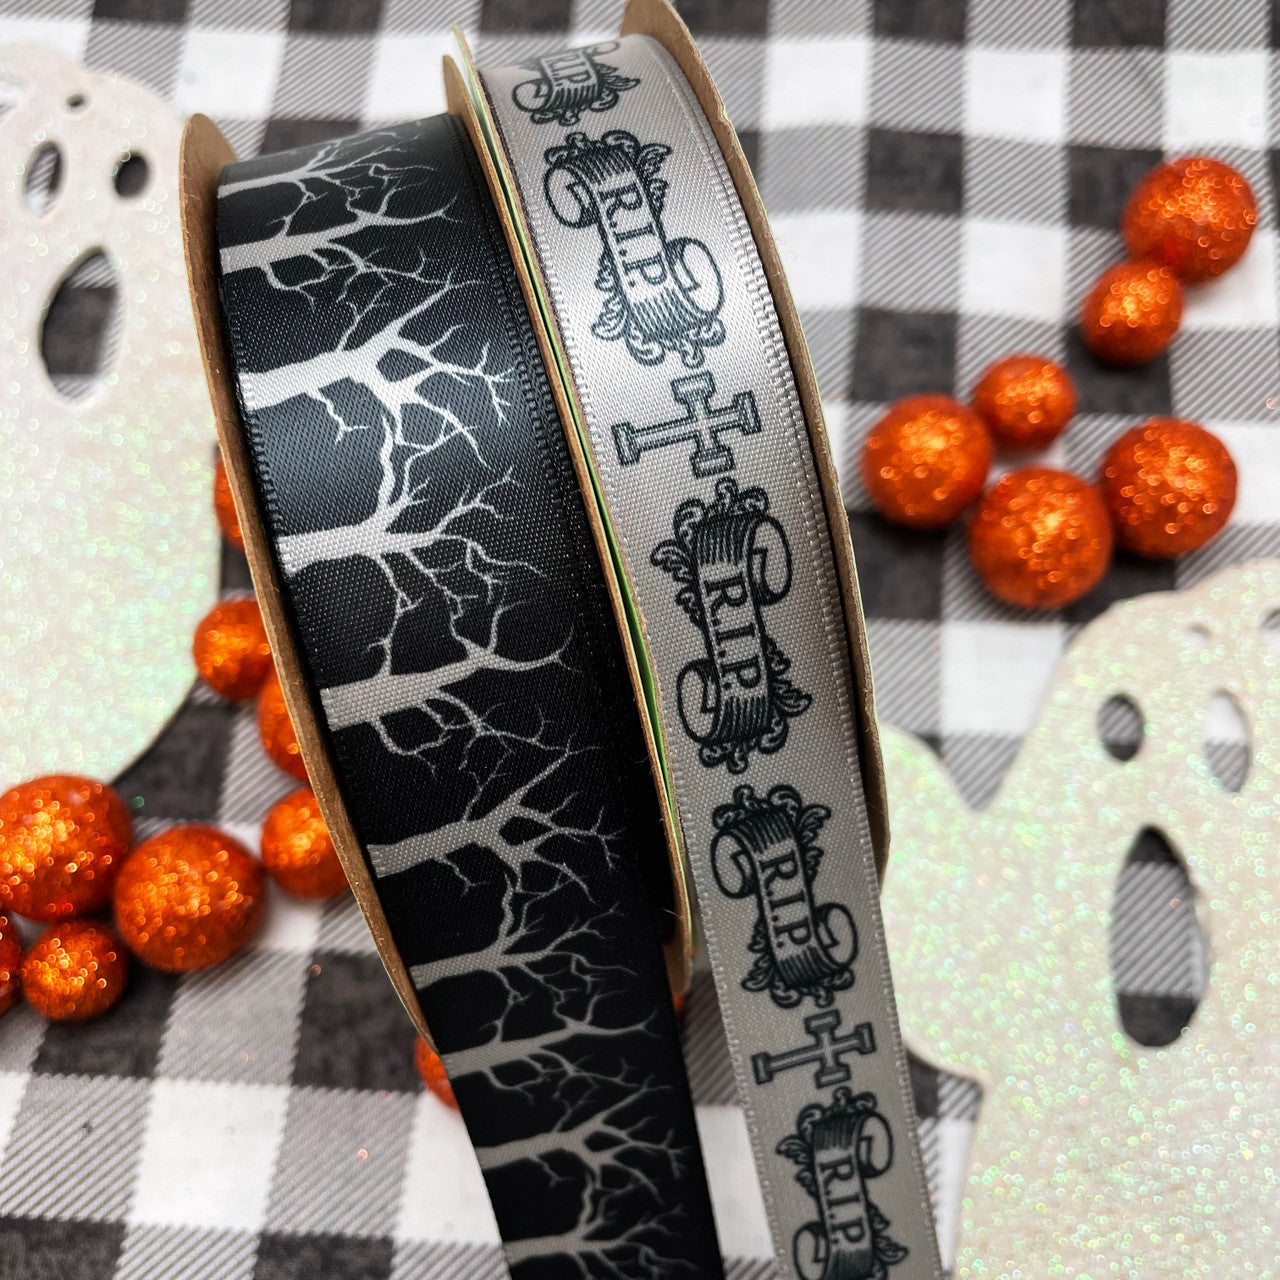 Mix and match our RIP ribbon with scary trees for truly spooky Halloween decor!